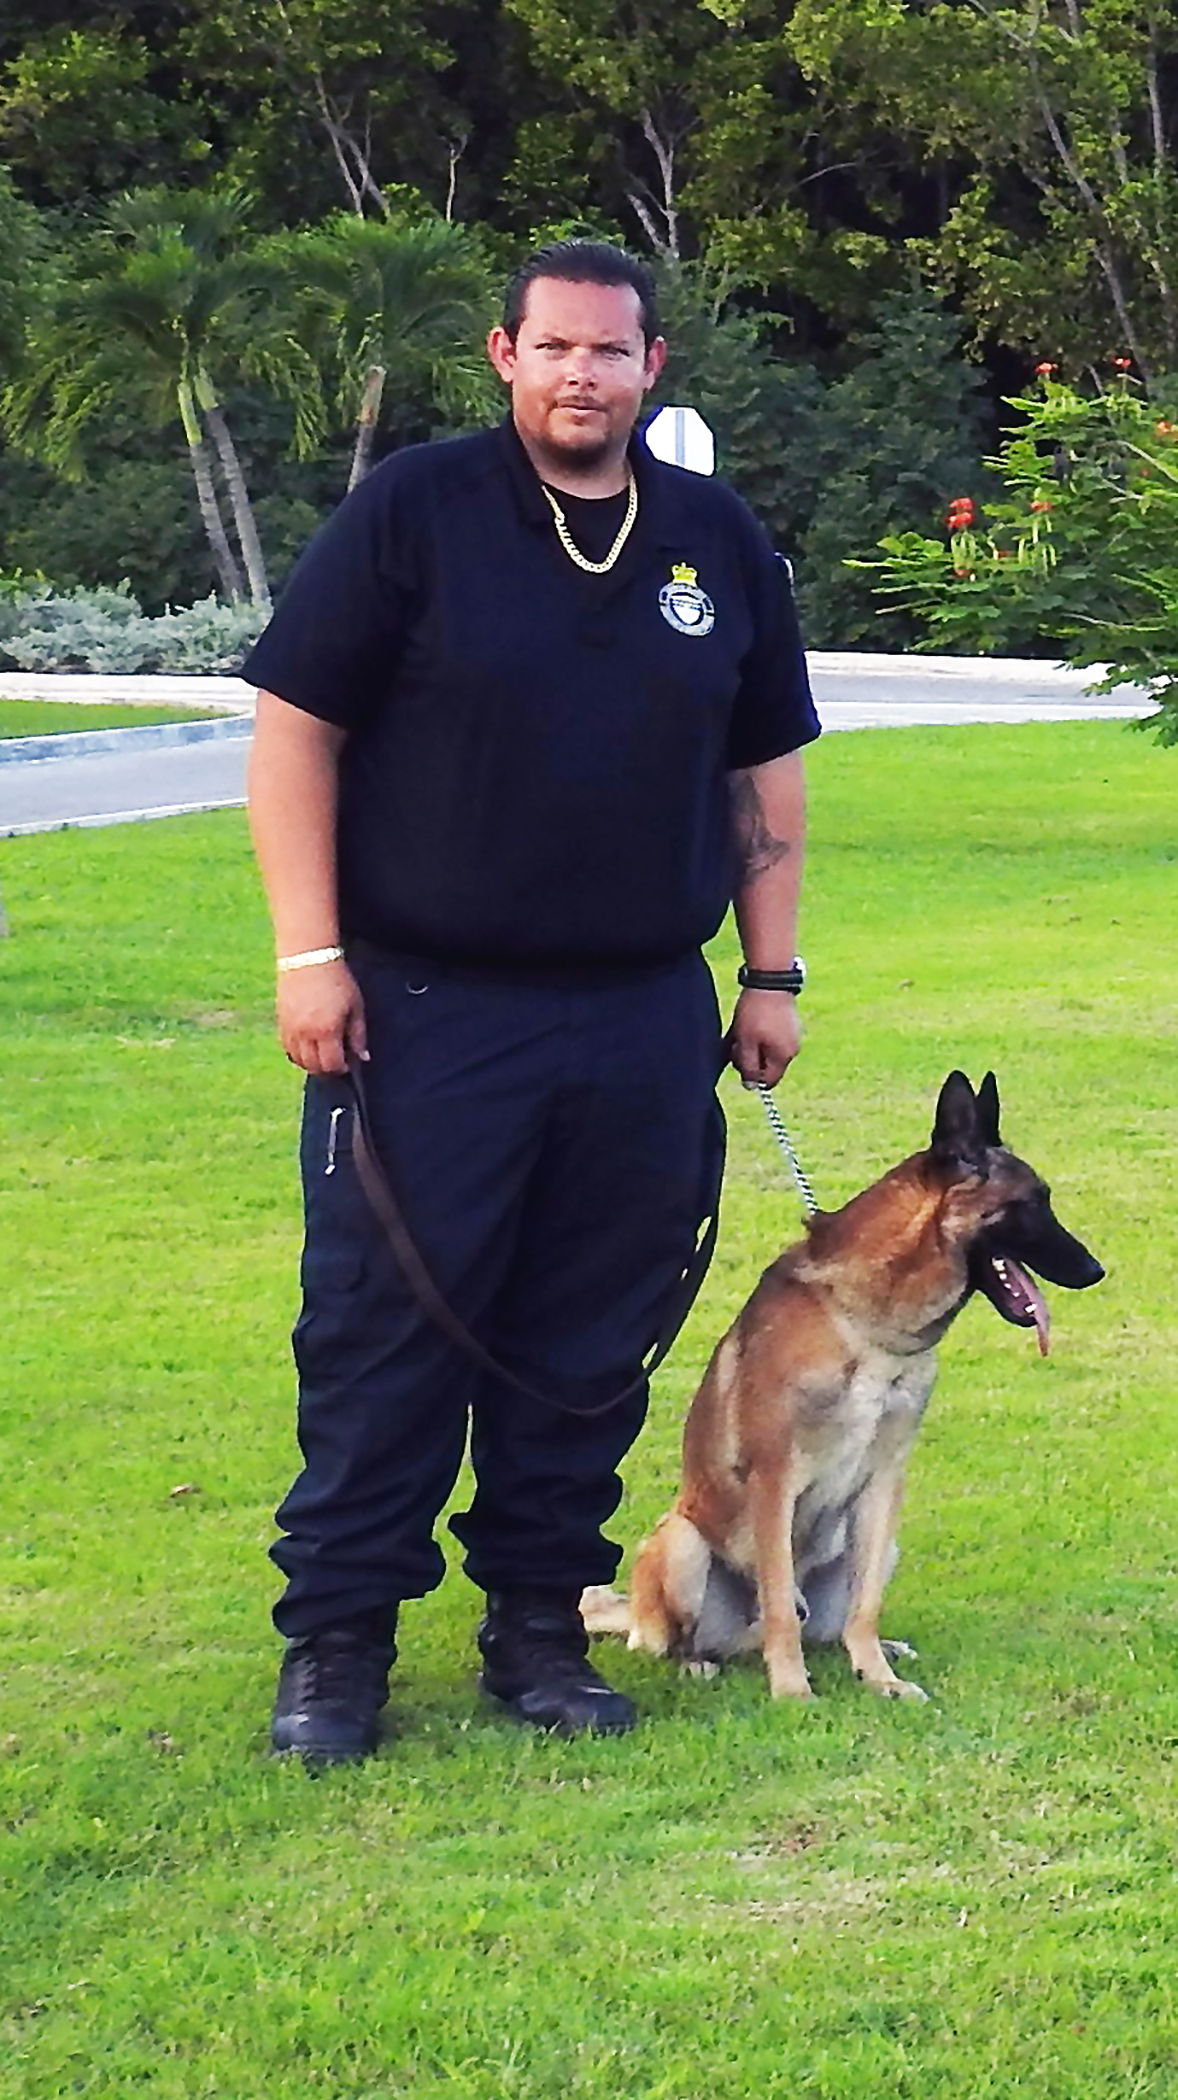 CBC Officer Anthony Echenique with canine Sjoerd, a Belgian Malinois